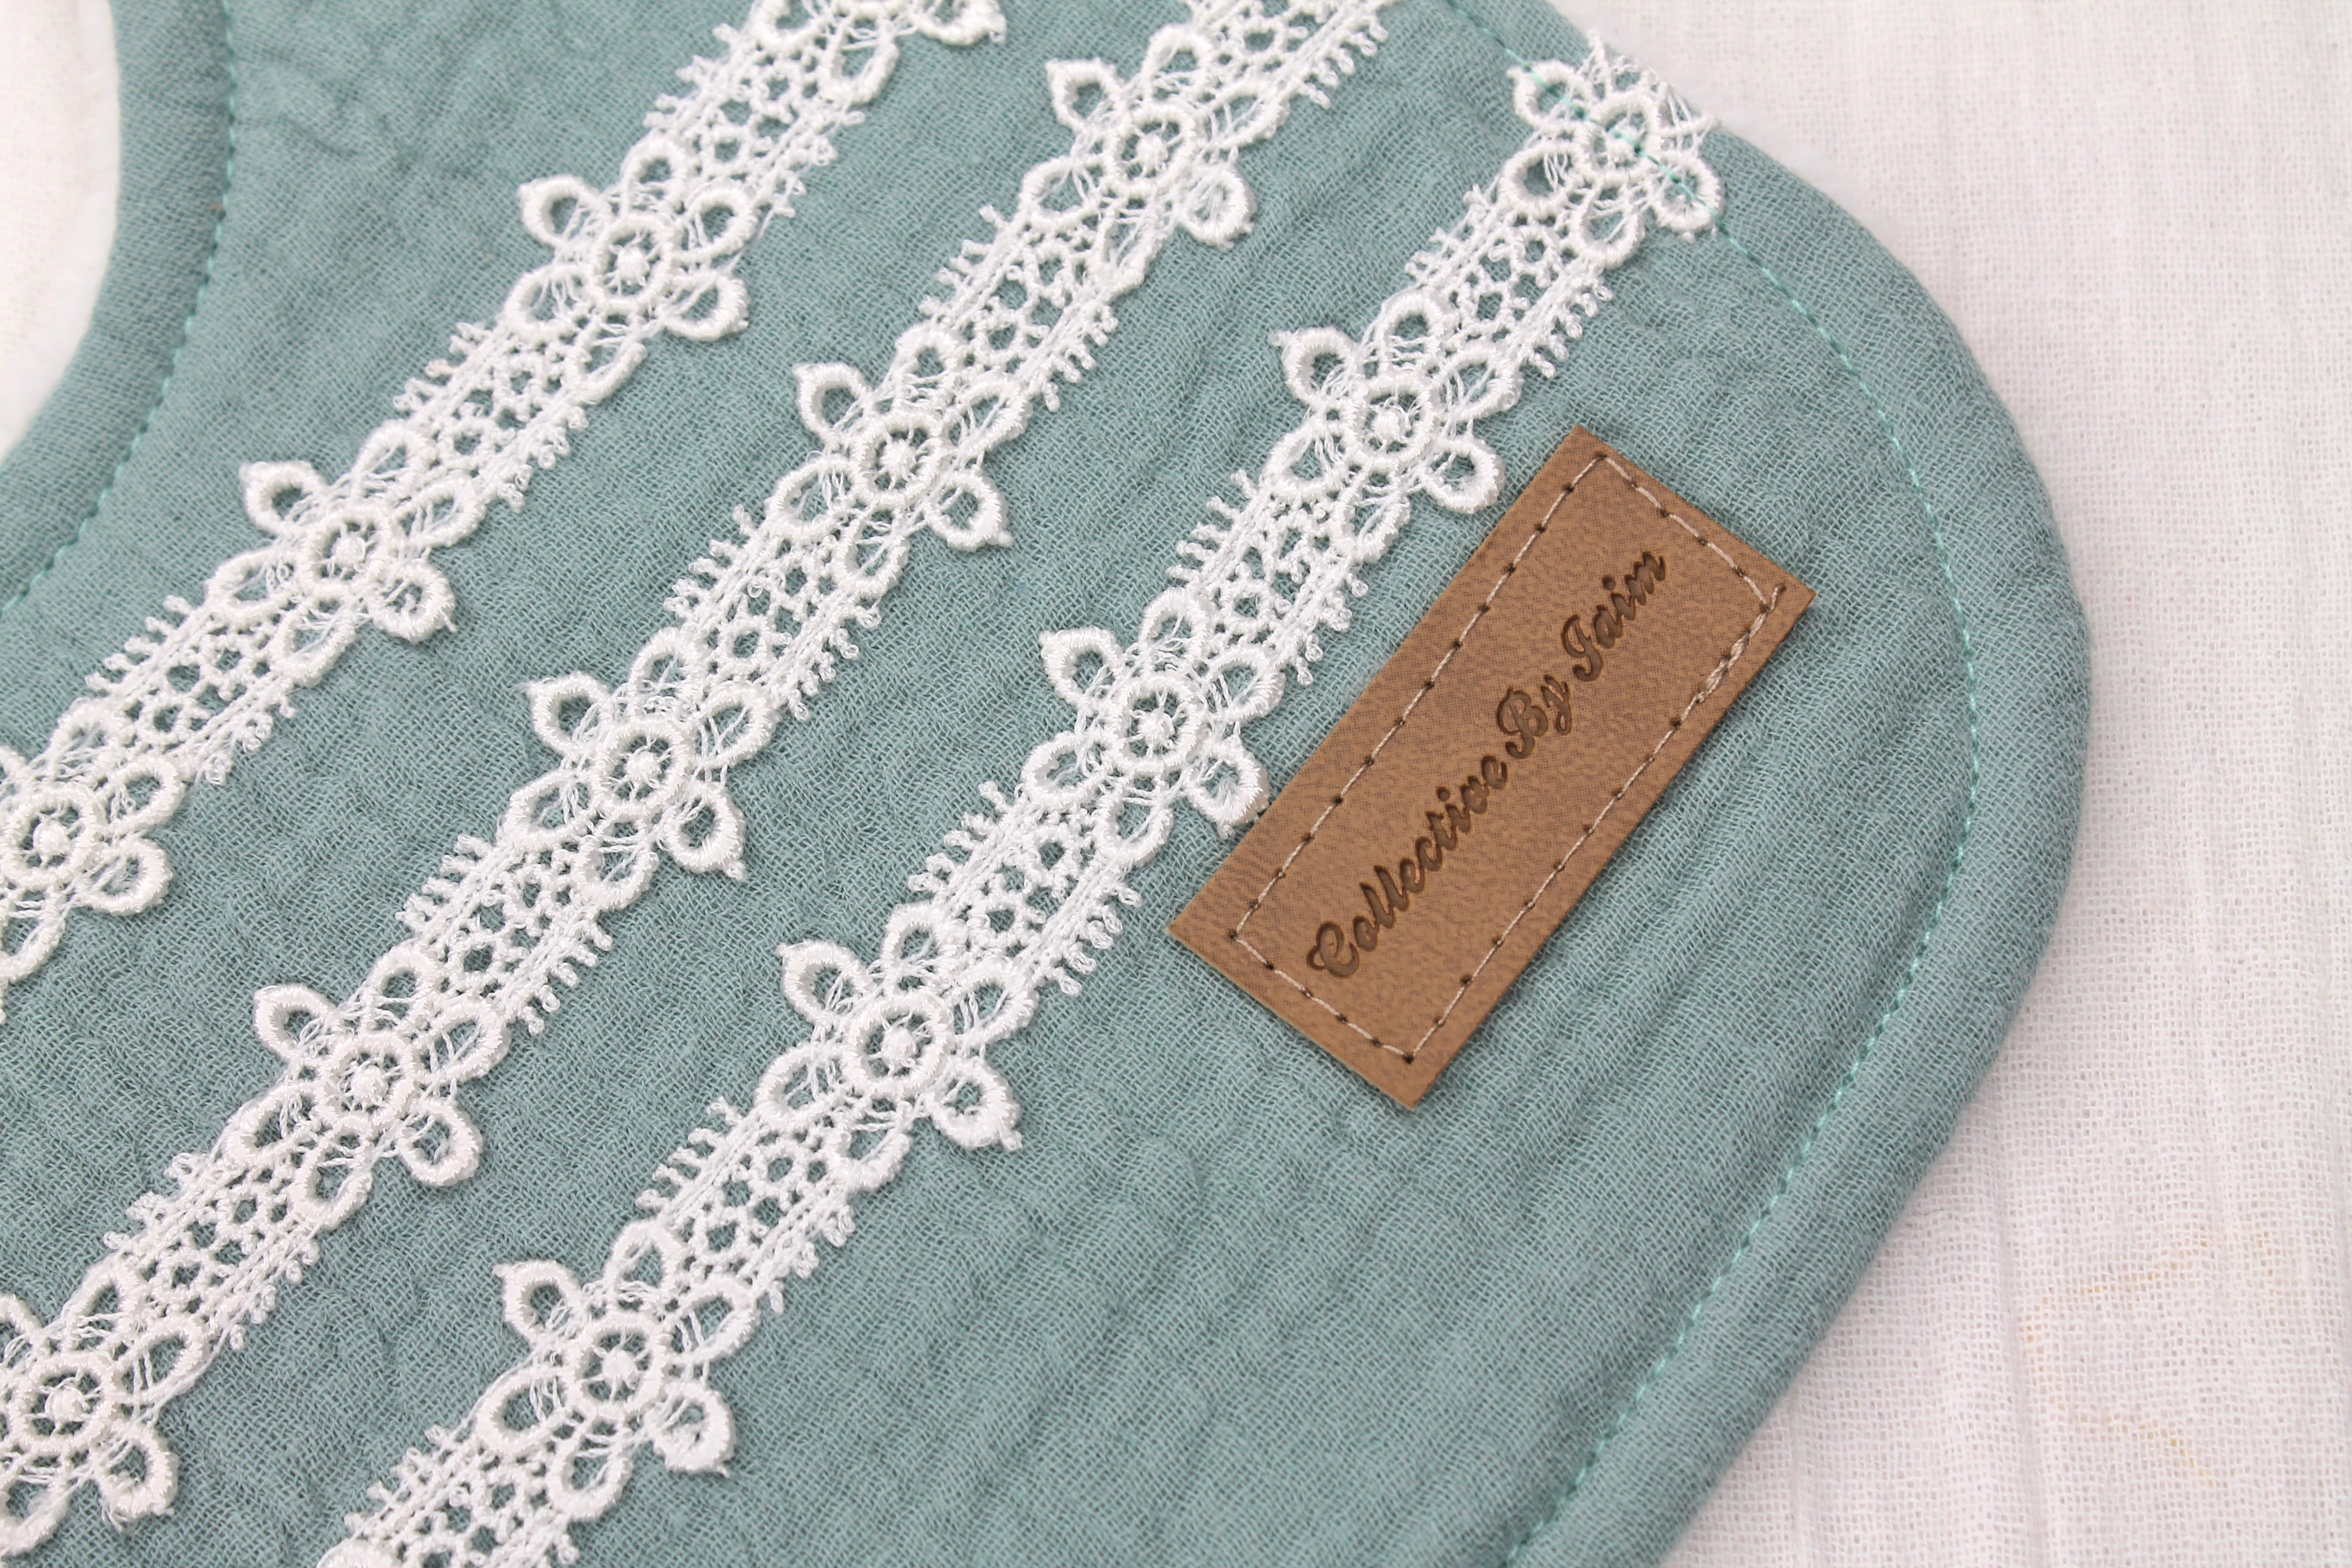 Ocean Double Cloth Daisy Chain Lace Bib with Fleece Backing